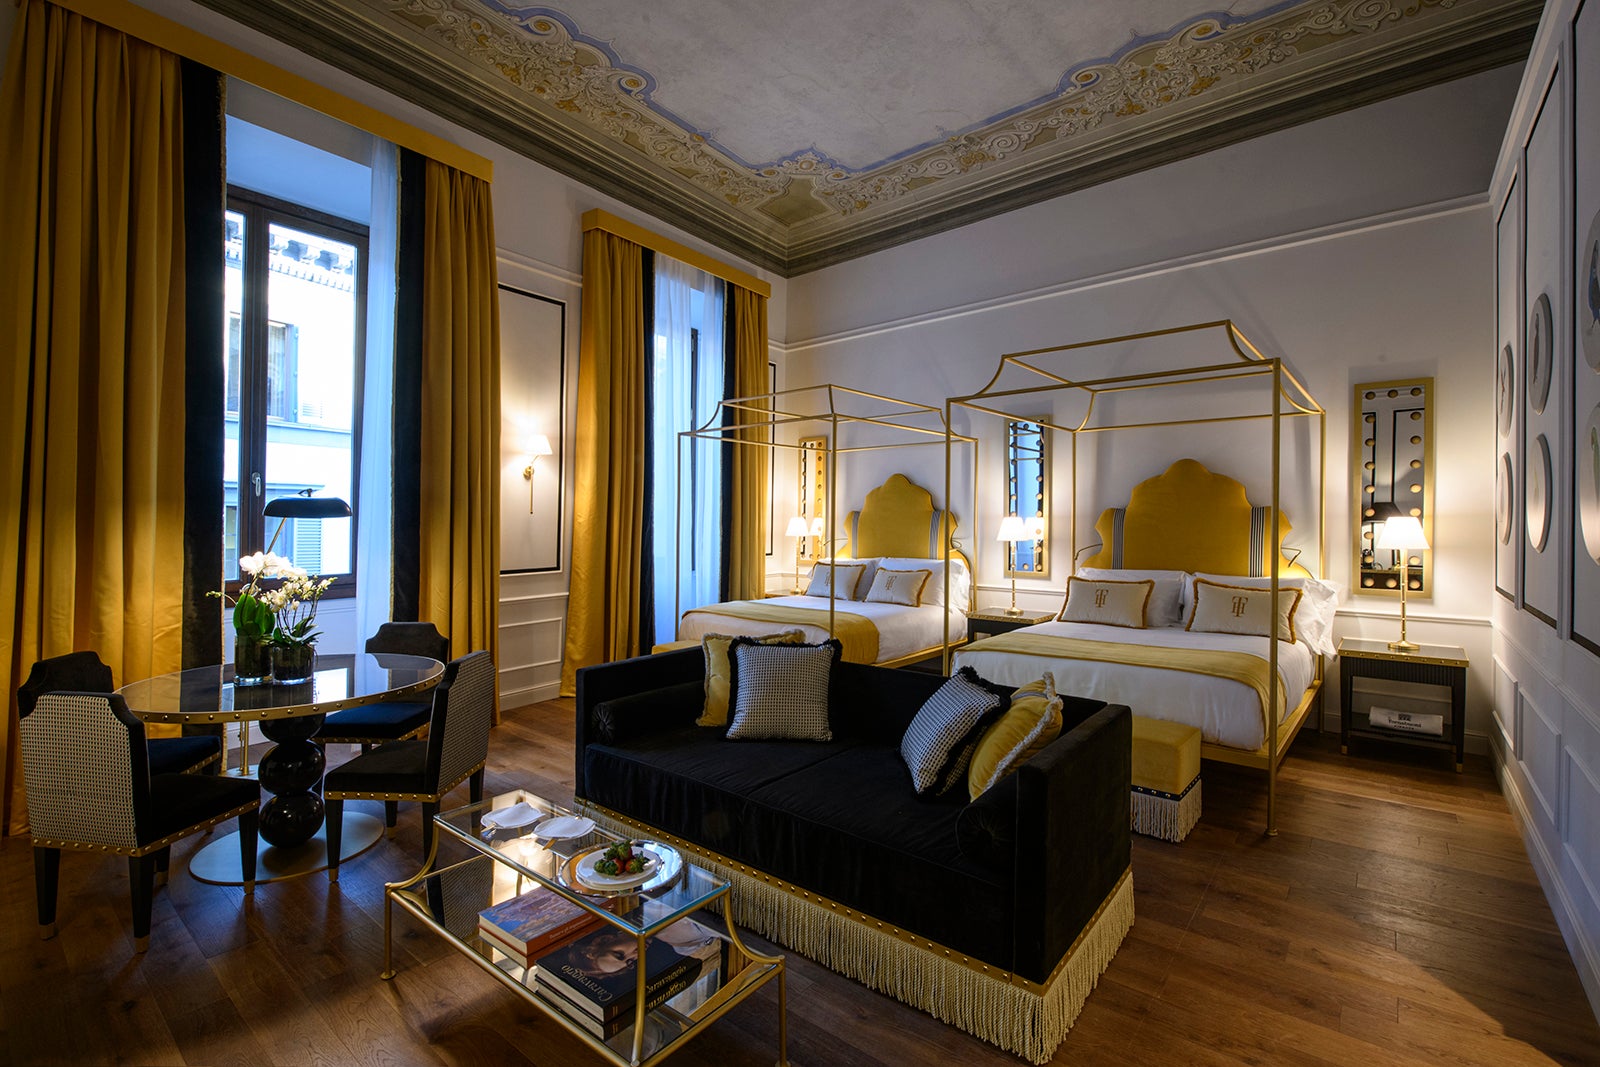 Hotel Il Tornabuoni in Florence, part of World of Hyatt